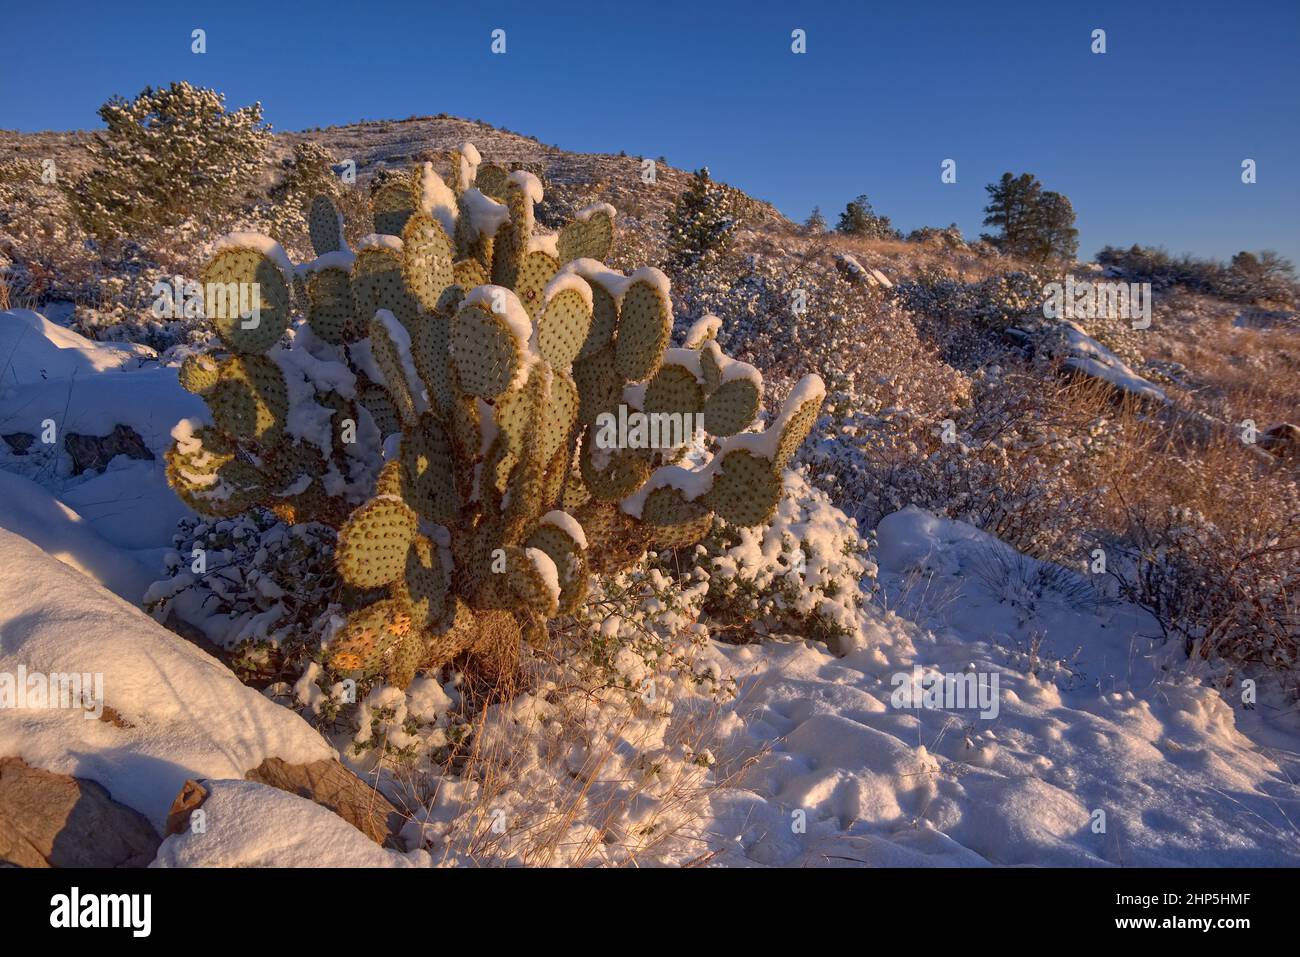 Morning sunlight shining on a snow covered Prickly Pear Cactus in Chino Valley AZ. Stock Photo